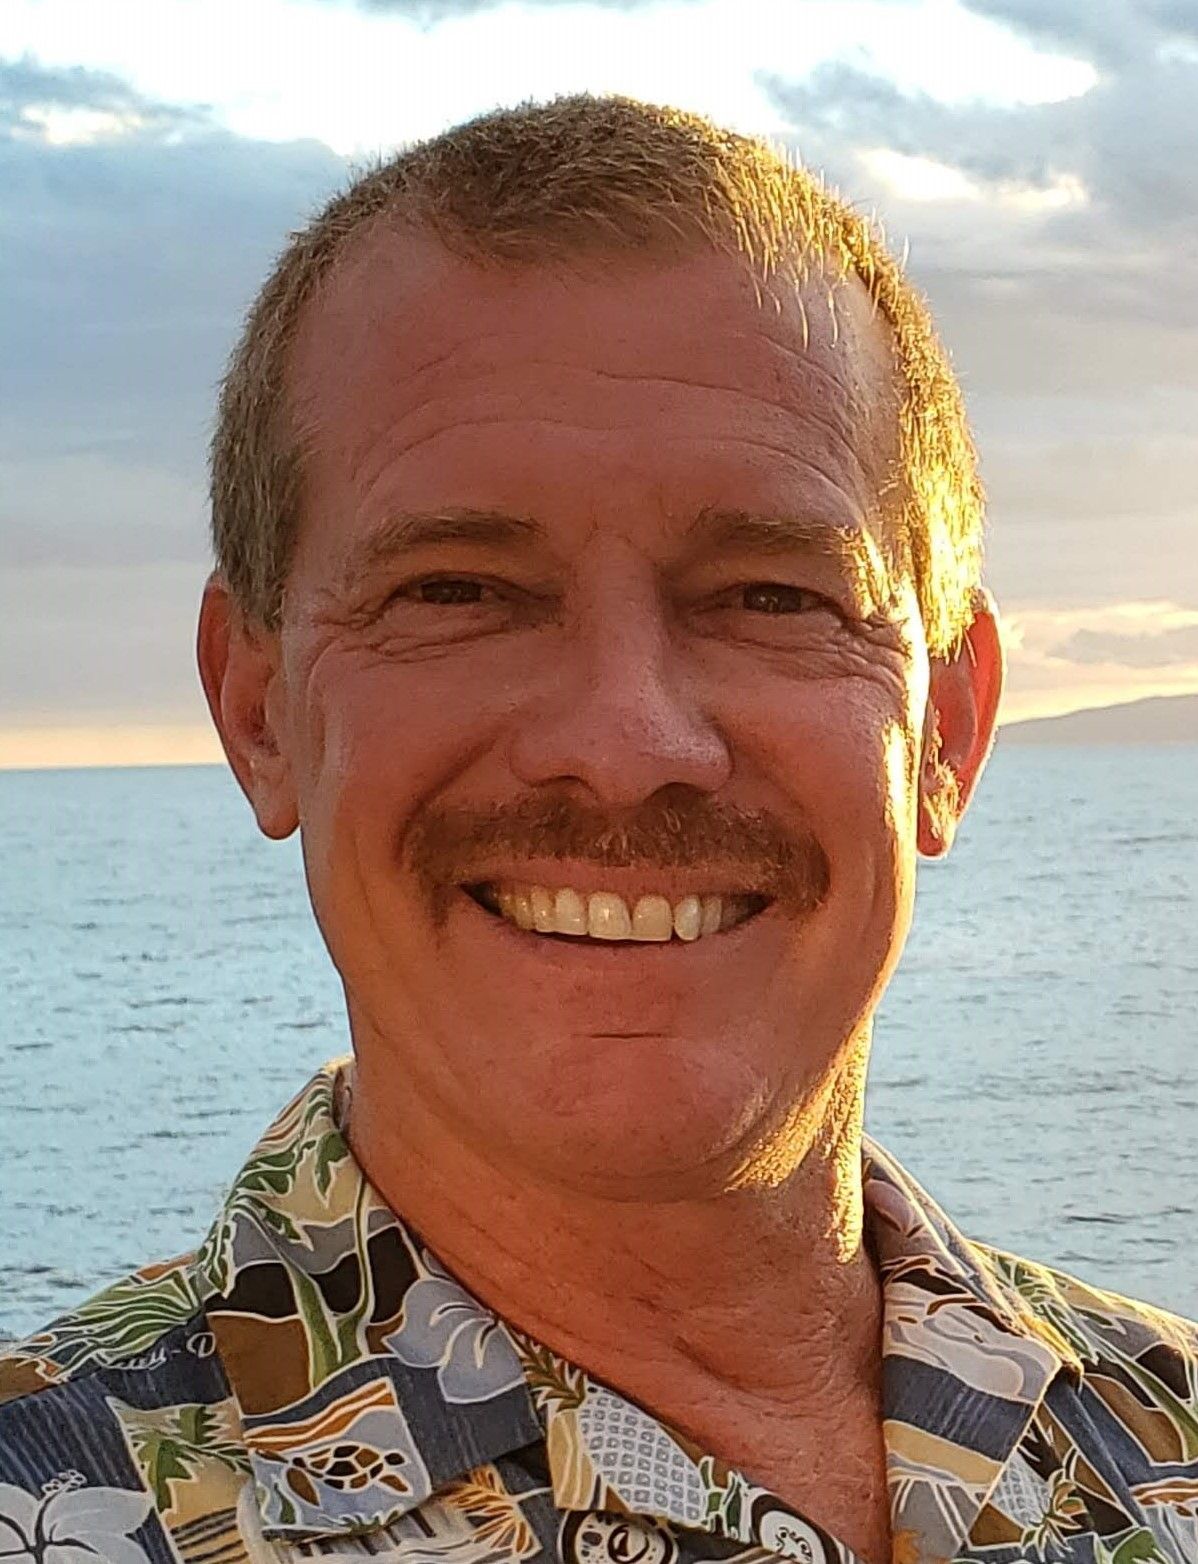 A man with a mustache is smiling in front of the ocean.